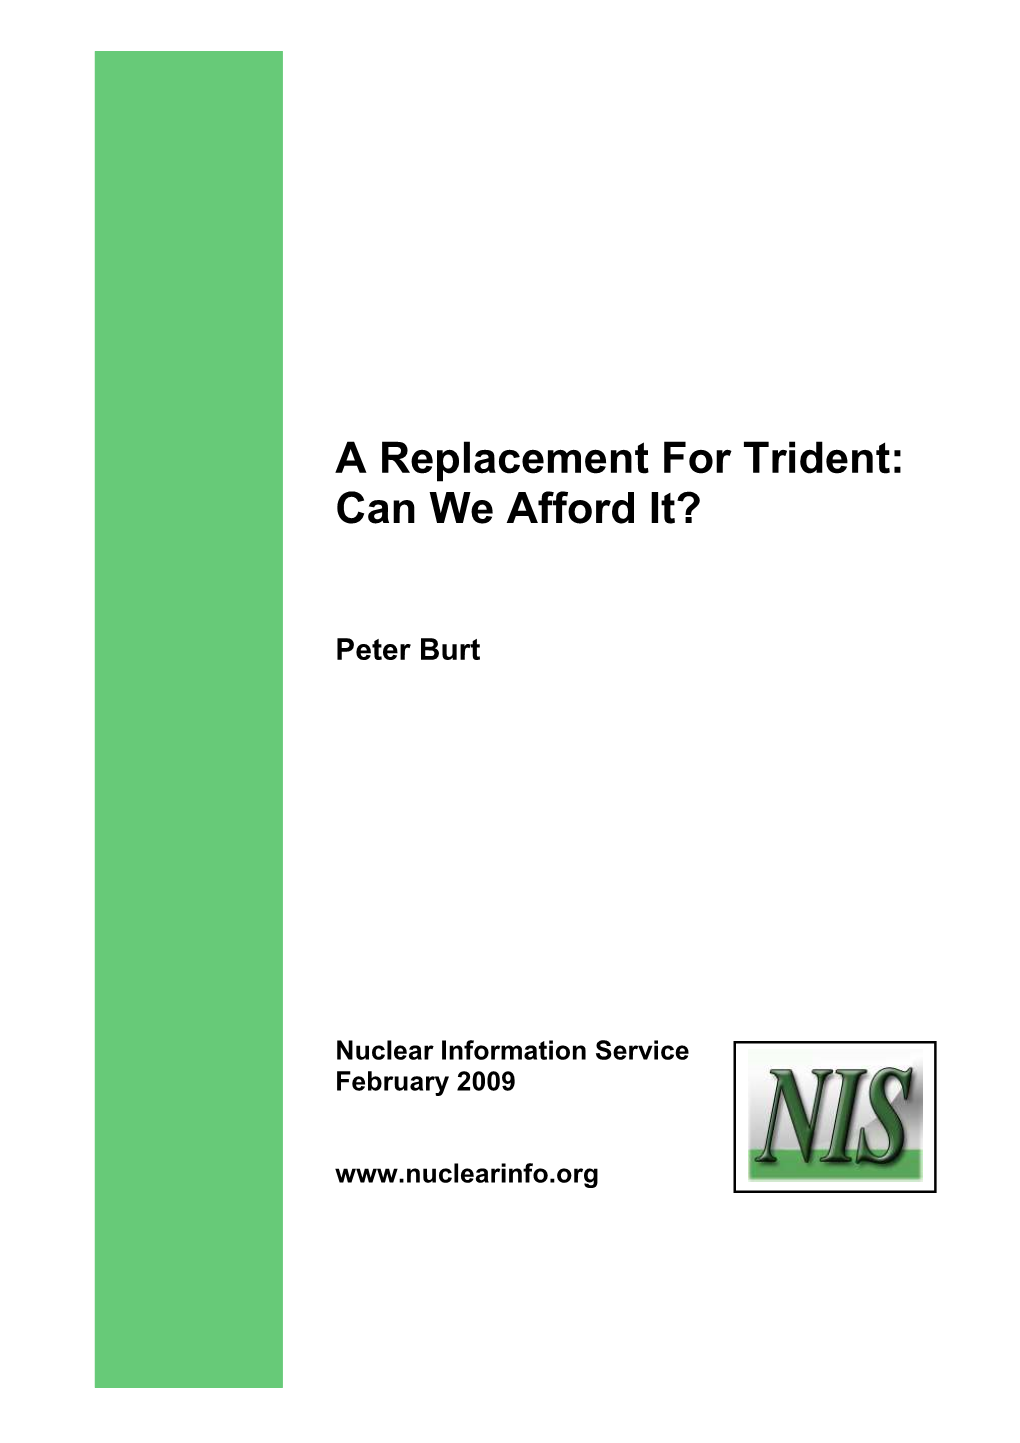 A Replacement for Trident: Can We Afford It?